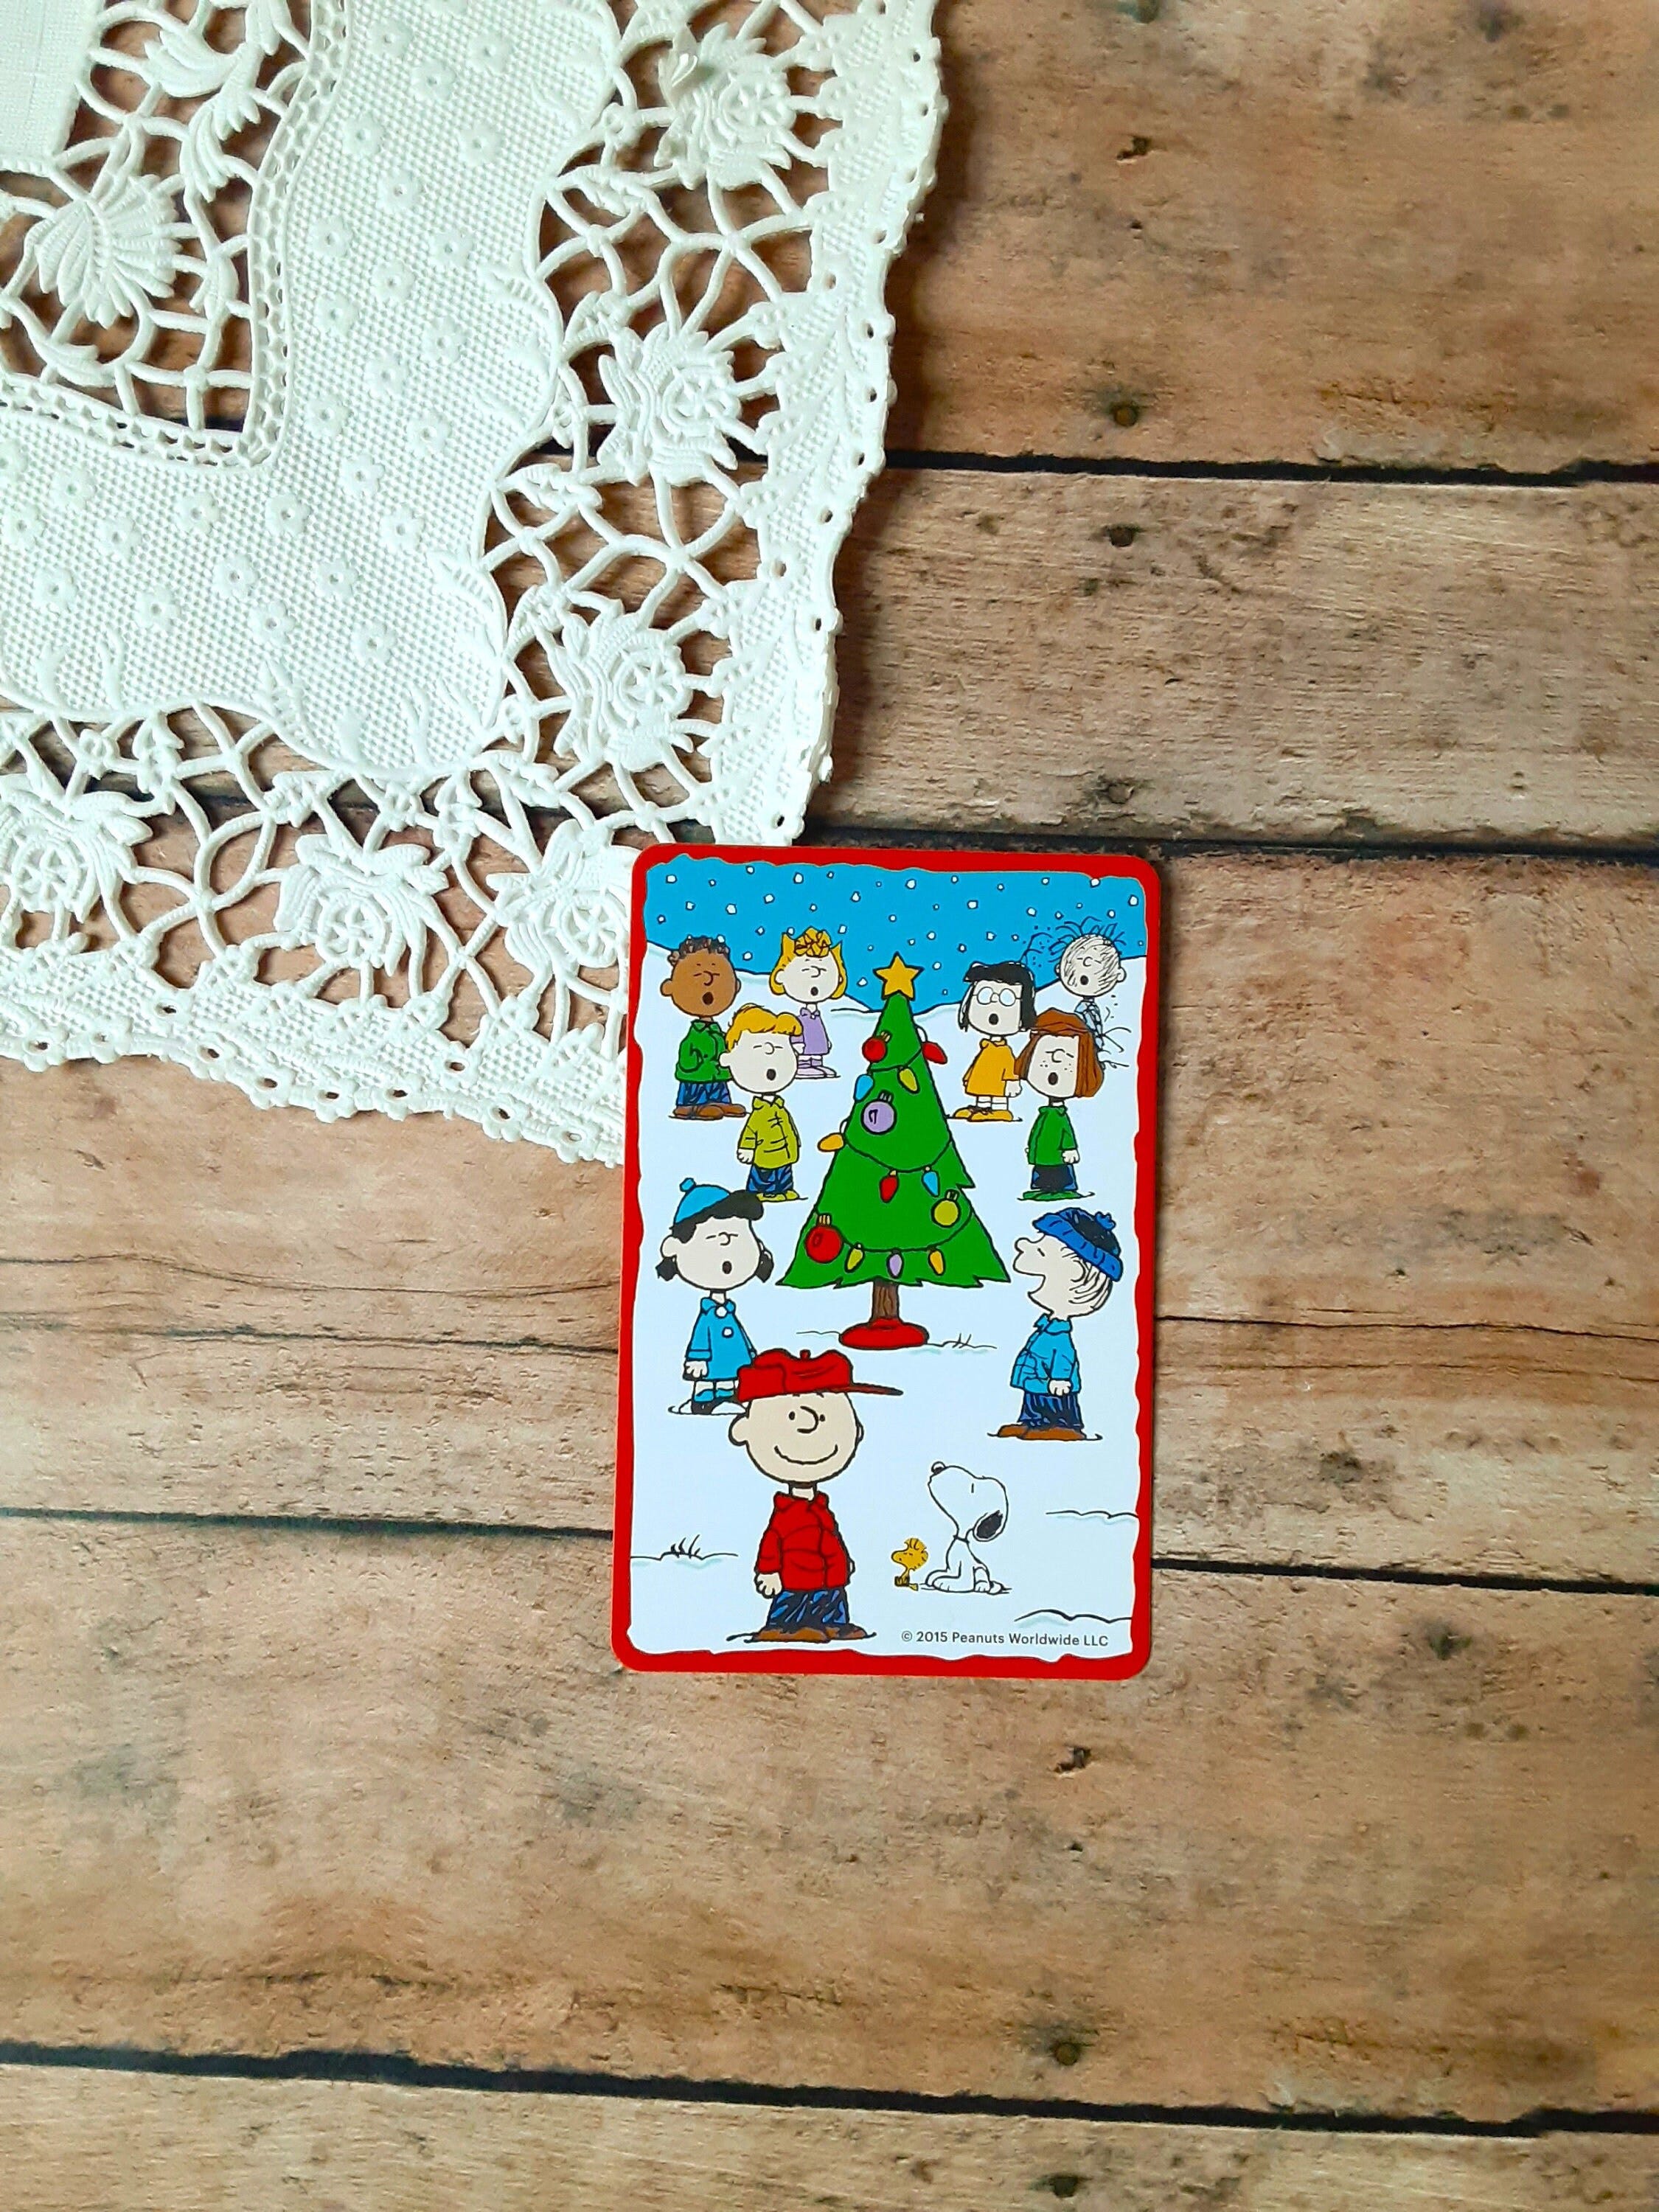 Vintage Playing Card, Junk Journal Element, Pen Pal, Retro Card Game, Card Swap, Journal Card, Game Ephemera, Peanuts Christmas, Mixed Media